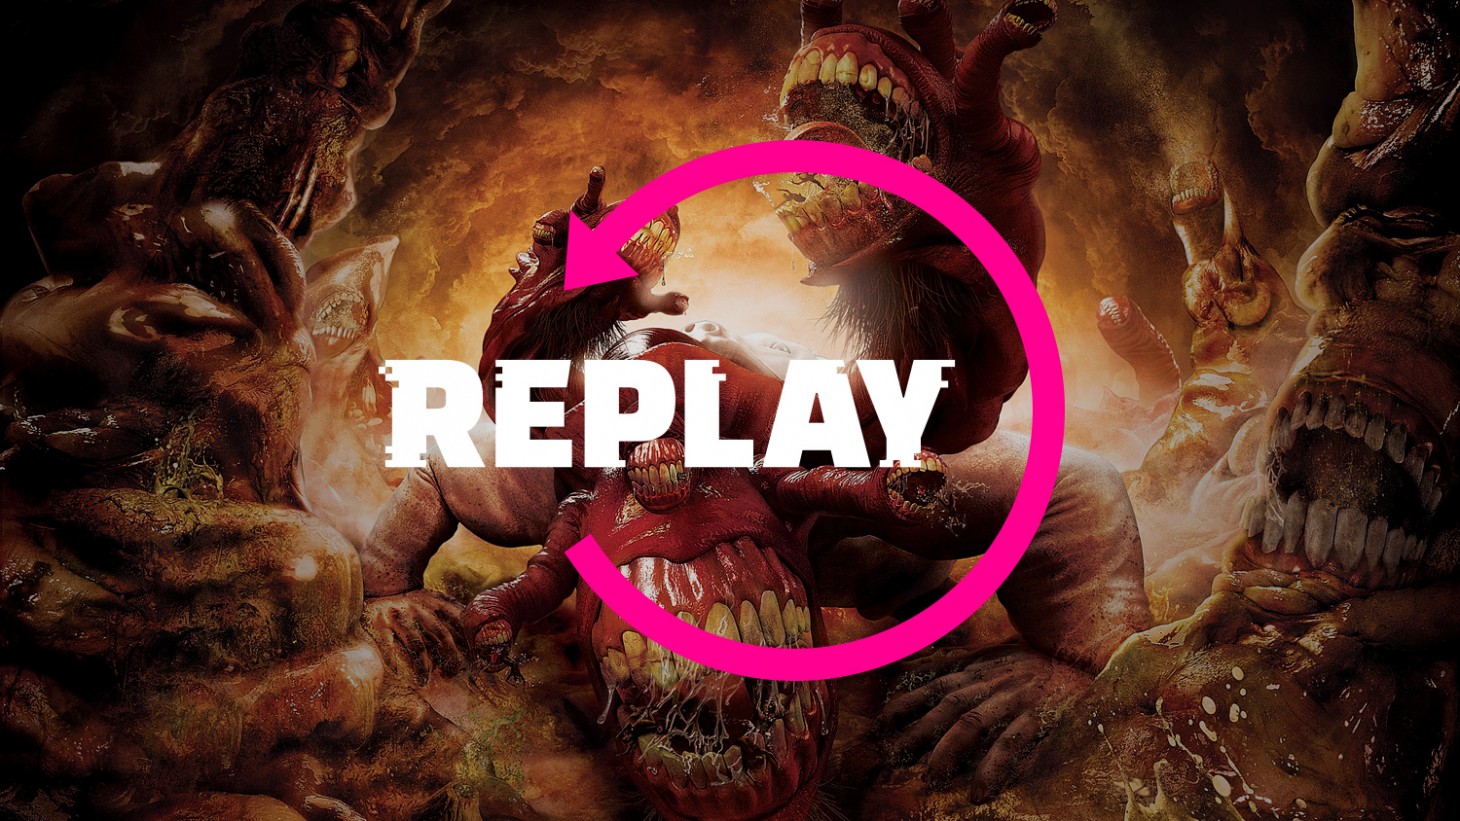 This week the Replay crew goes to hell to check out Dante's Inferno.